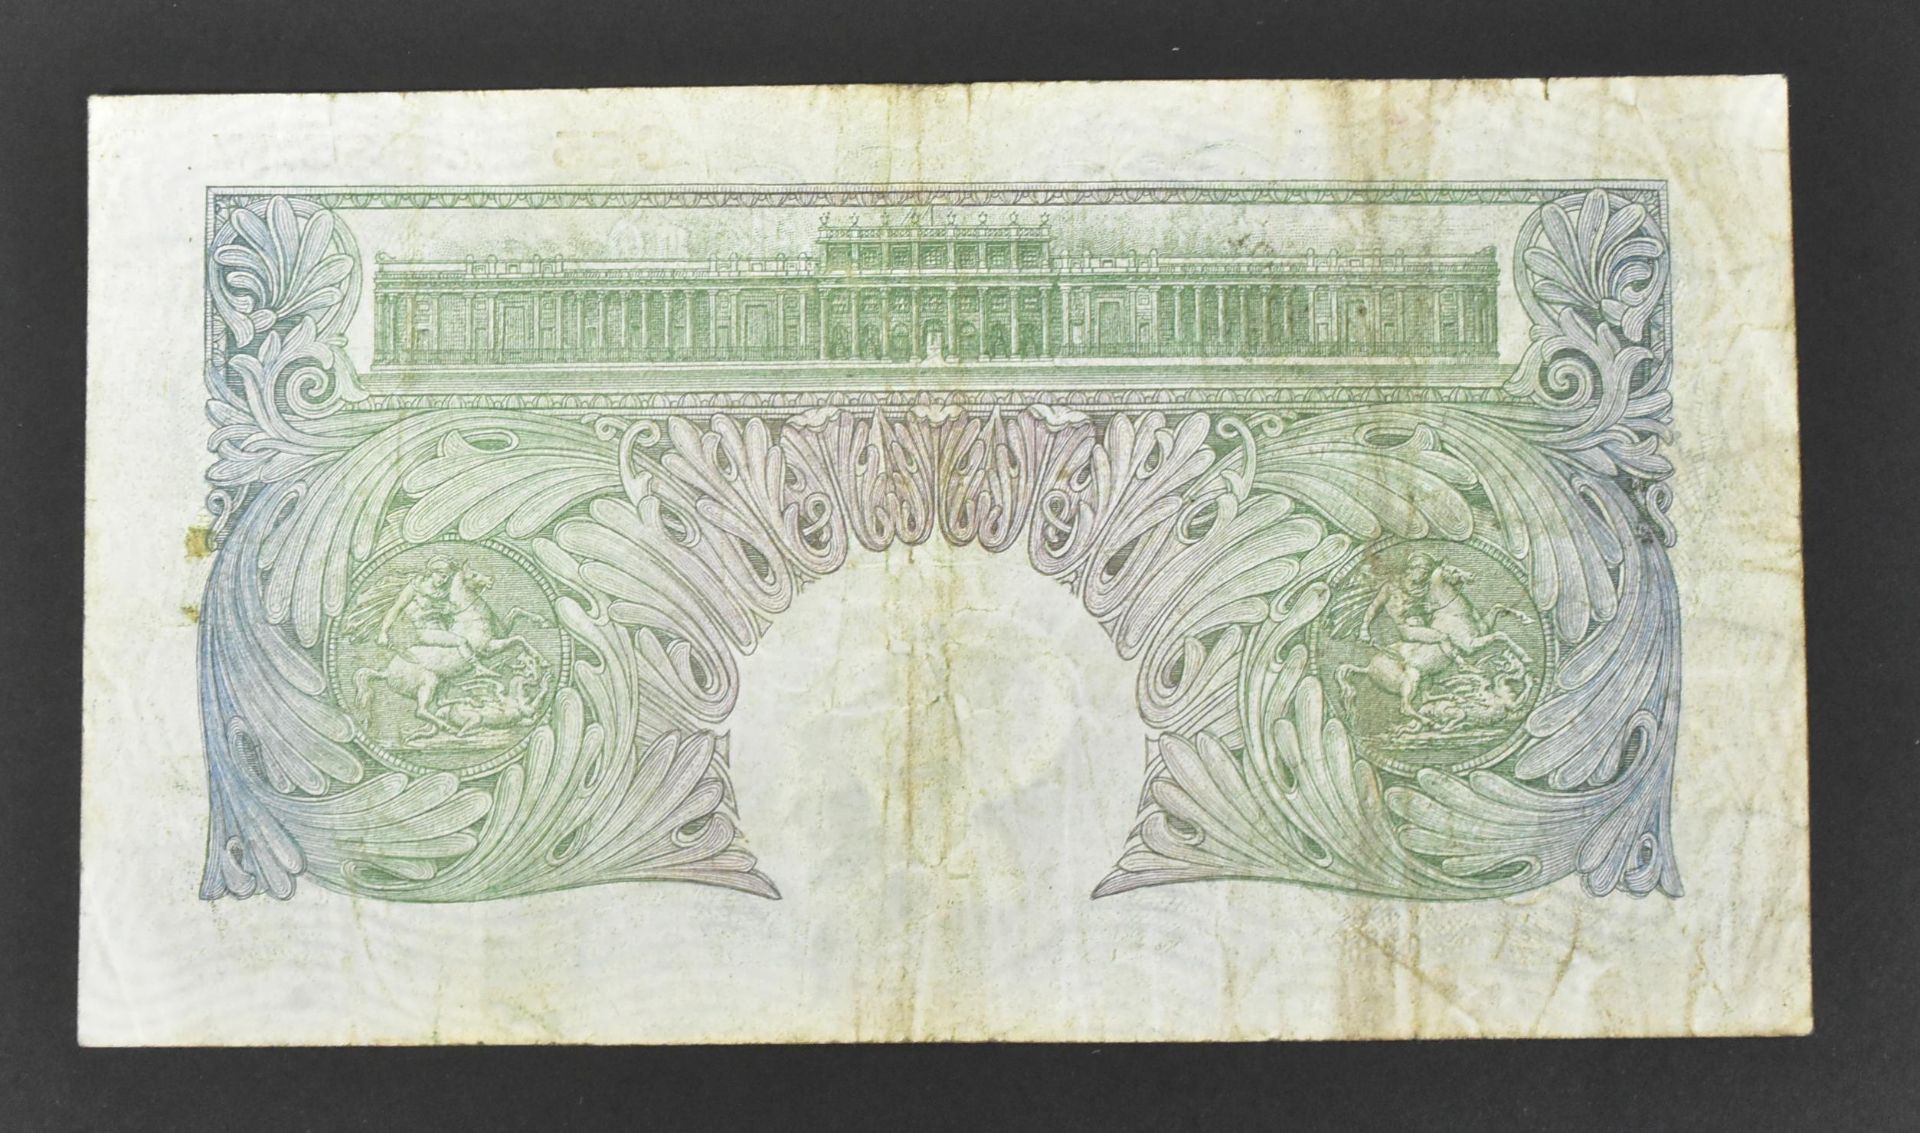 COLLECTION BRITISH UNCIRCULATED BANK NOTES - Image 27 of 61